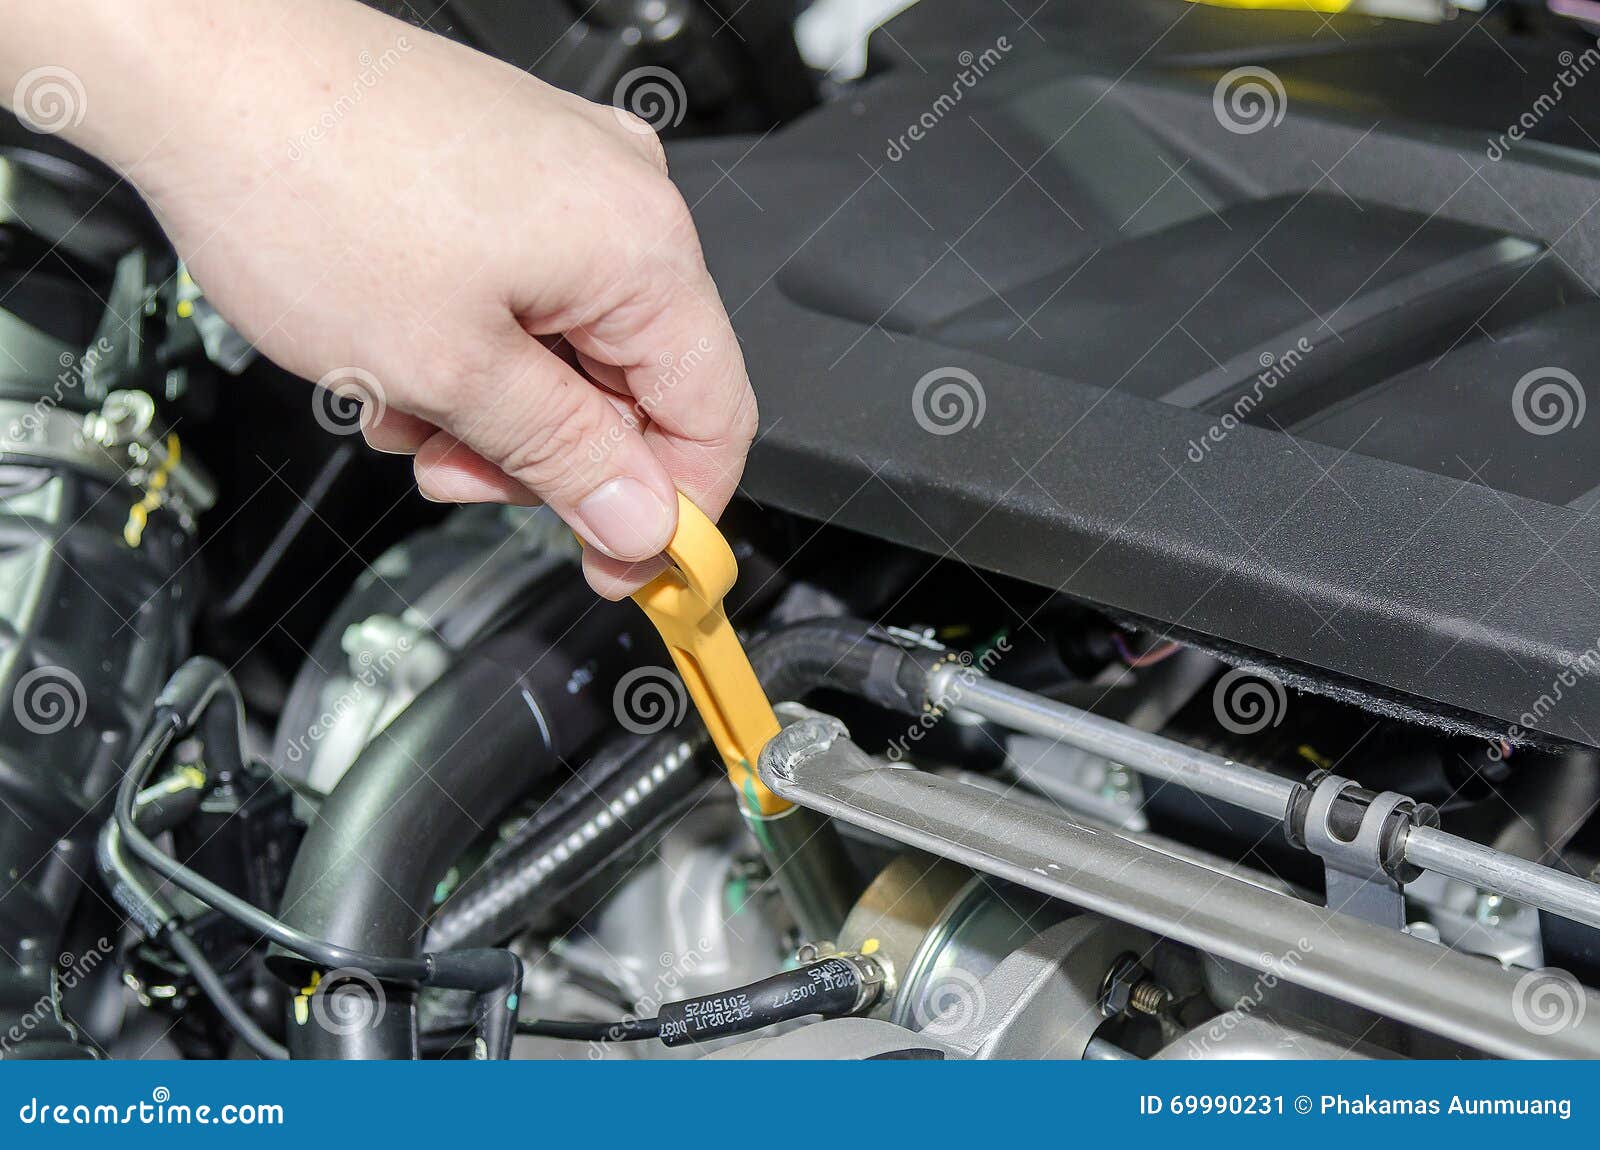 checking for engine oil on a car